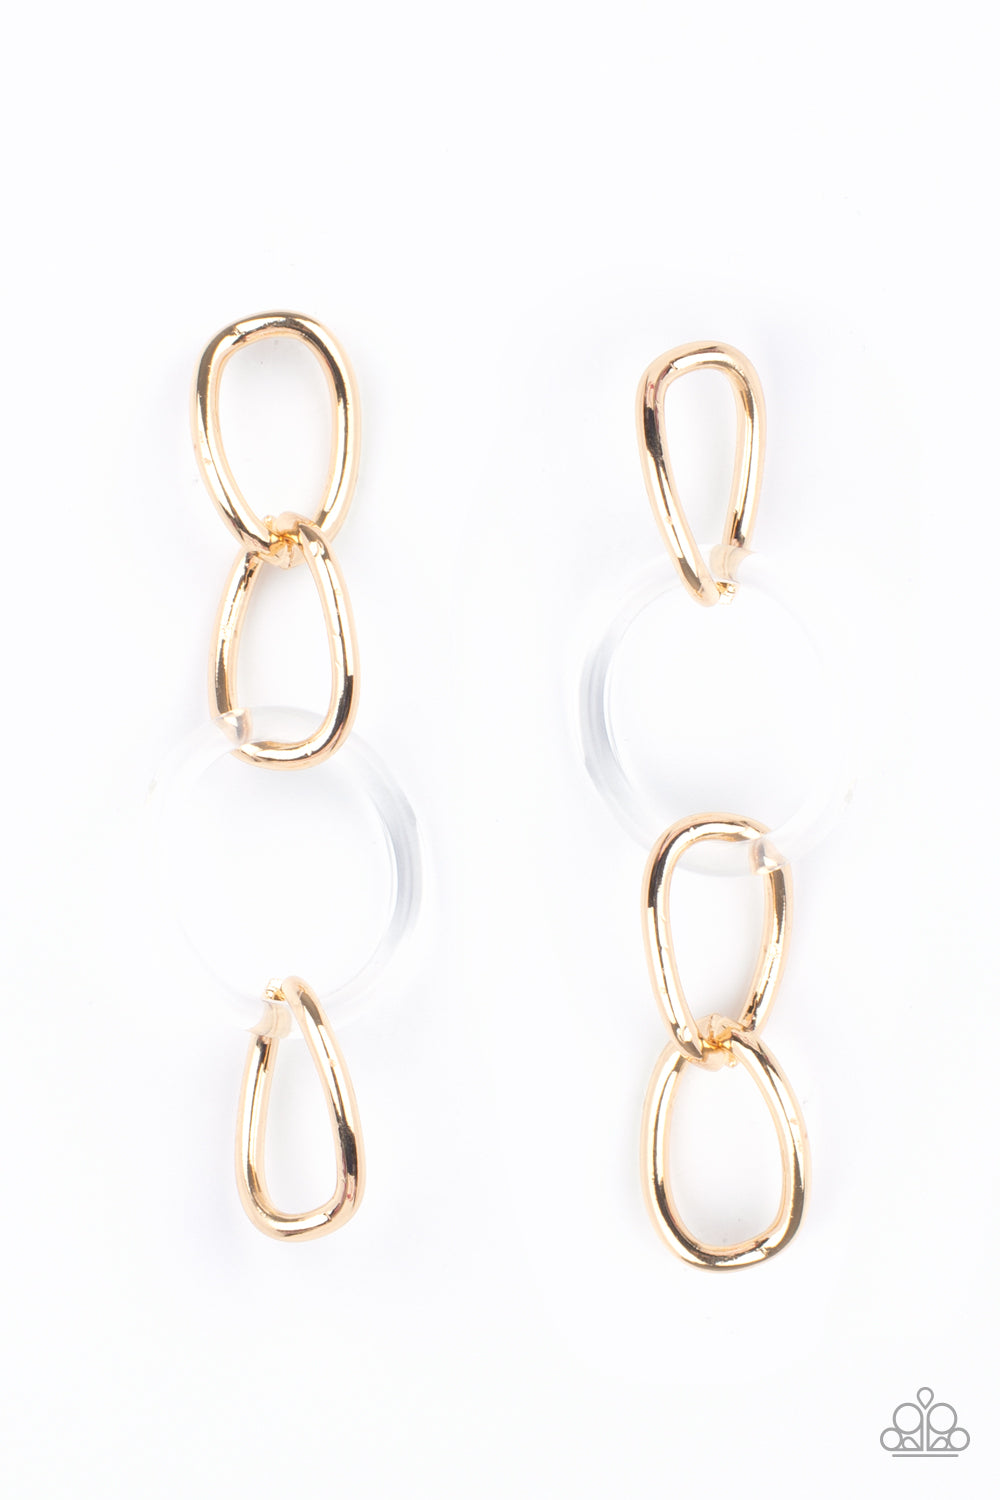 Talk In Circles Gold Earring - Paparazzi Accessories  Bright gold oversized links, interrupted by a single large clear acrylic ring, fall from the ear in linked succession for an on-trend fashion statement. Earring attaches to a standard post fitting.  All Paparazzi Accessories are lead free and nickel free!  Sold as one pair of post earrings.